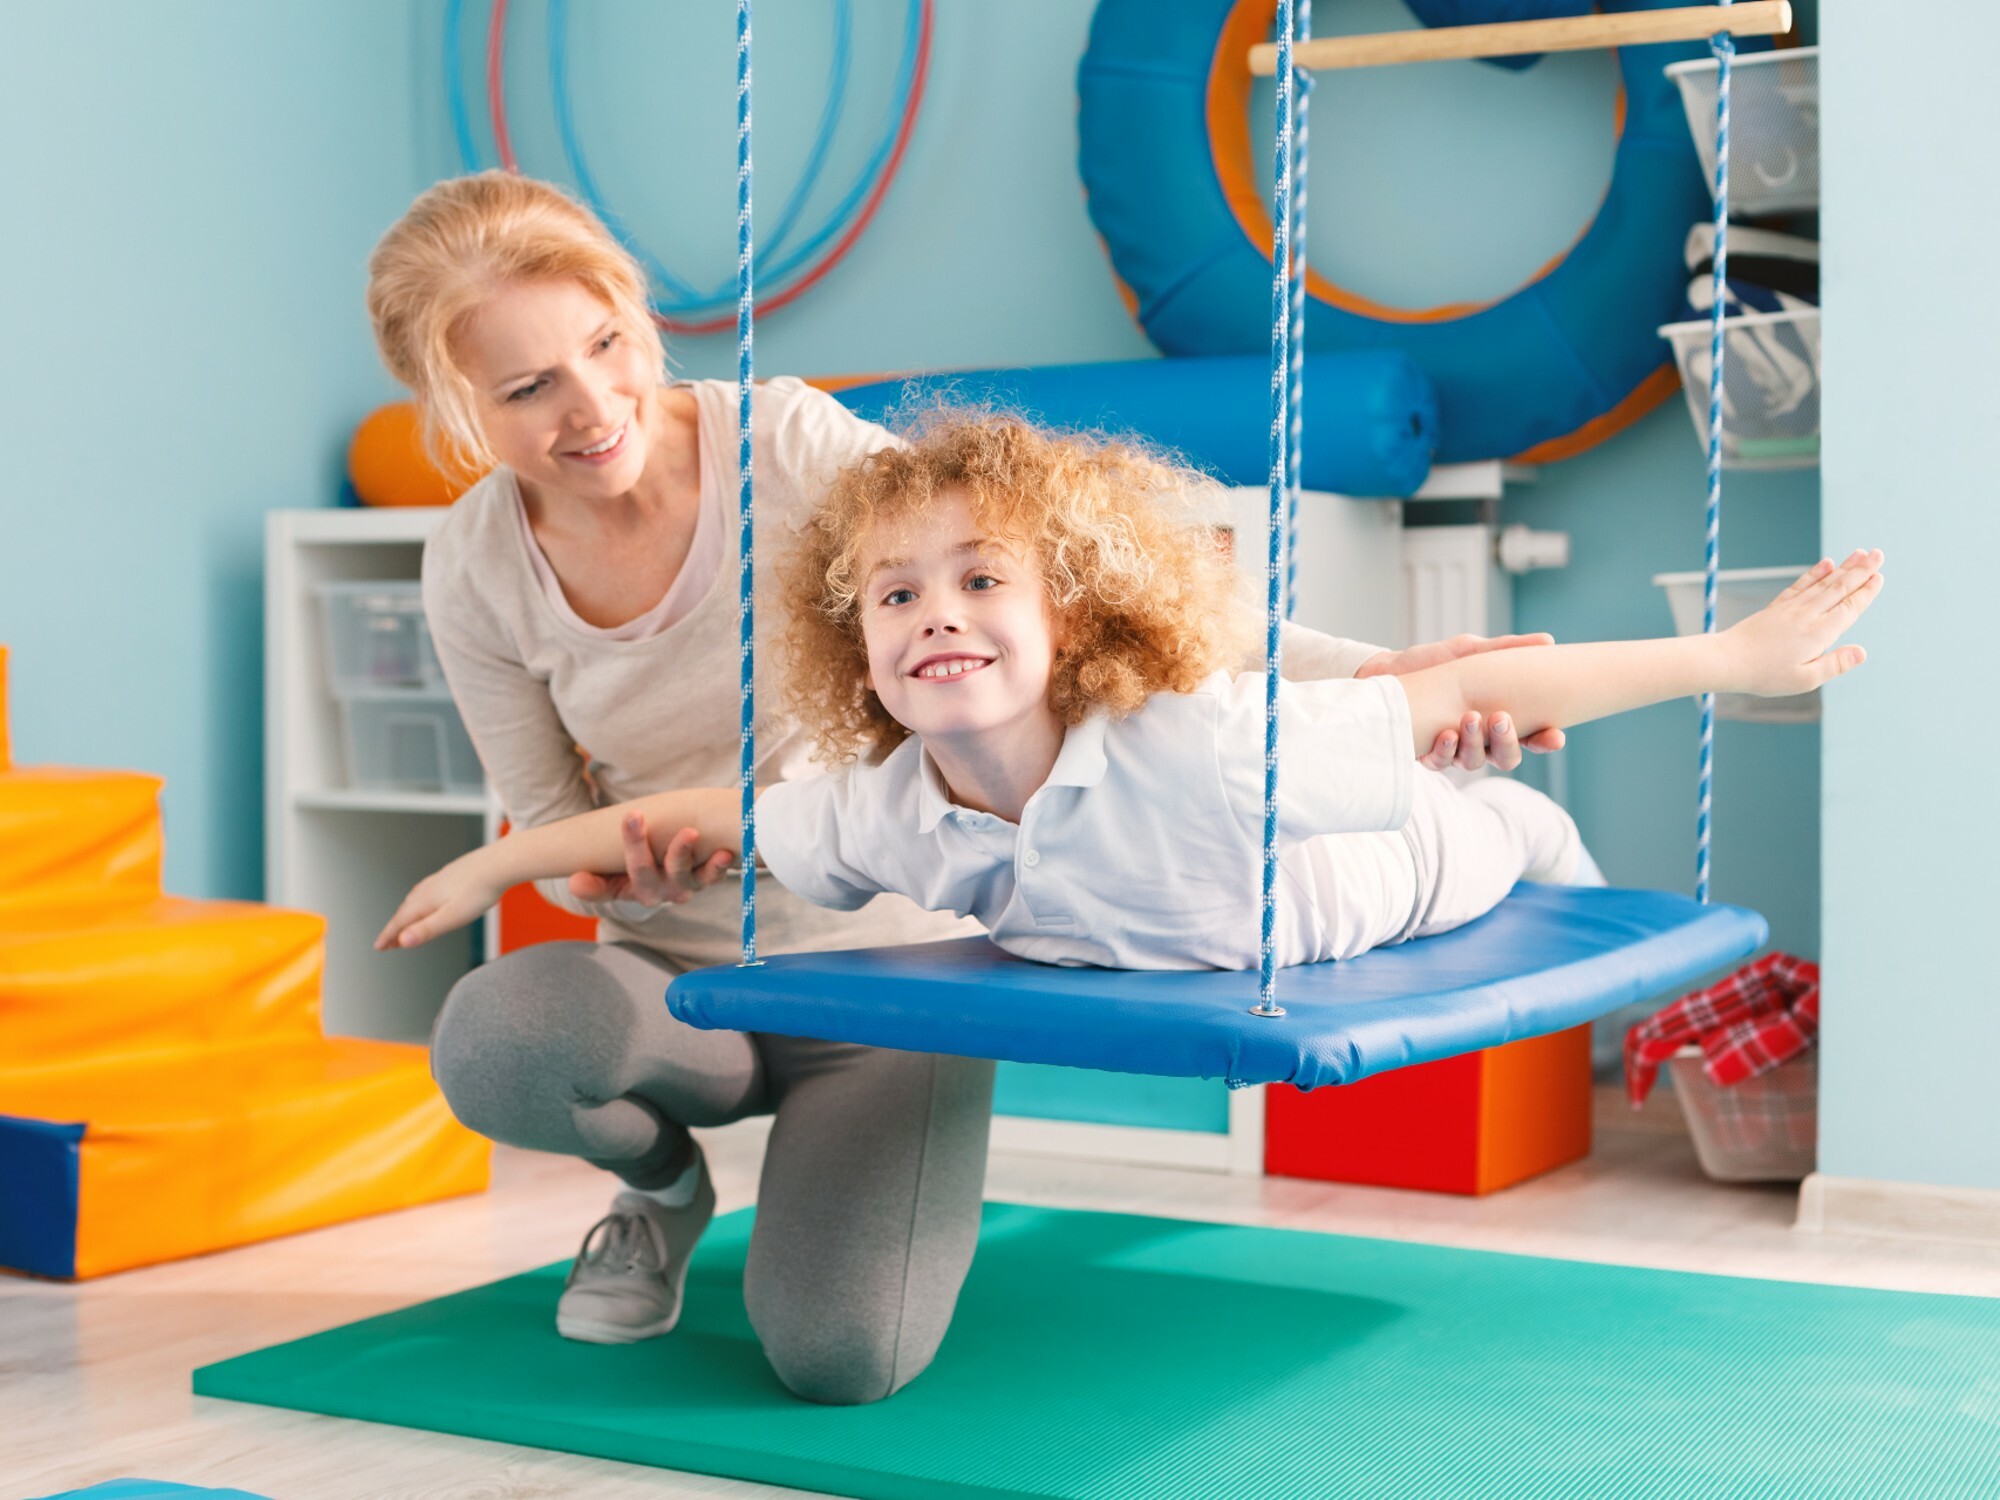 How can physiotherapy help children?